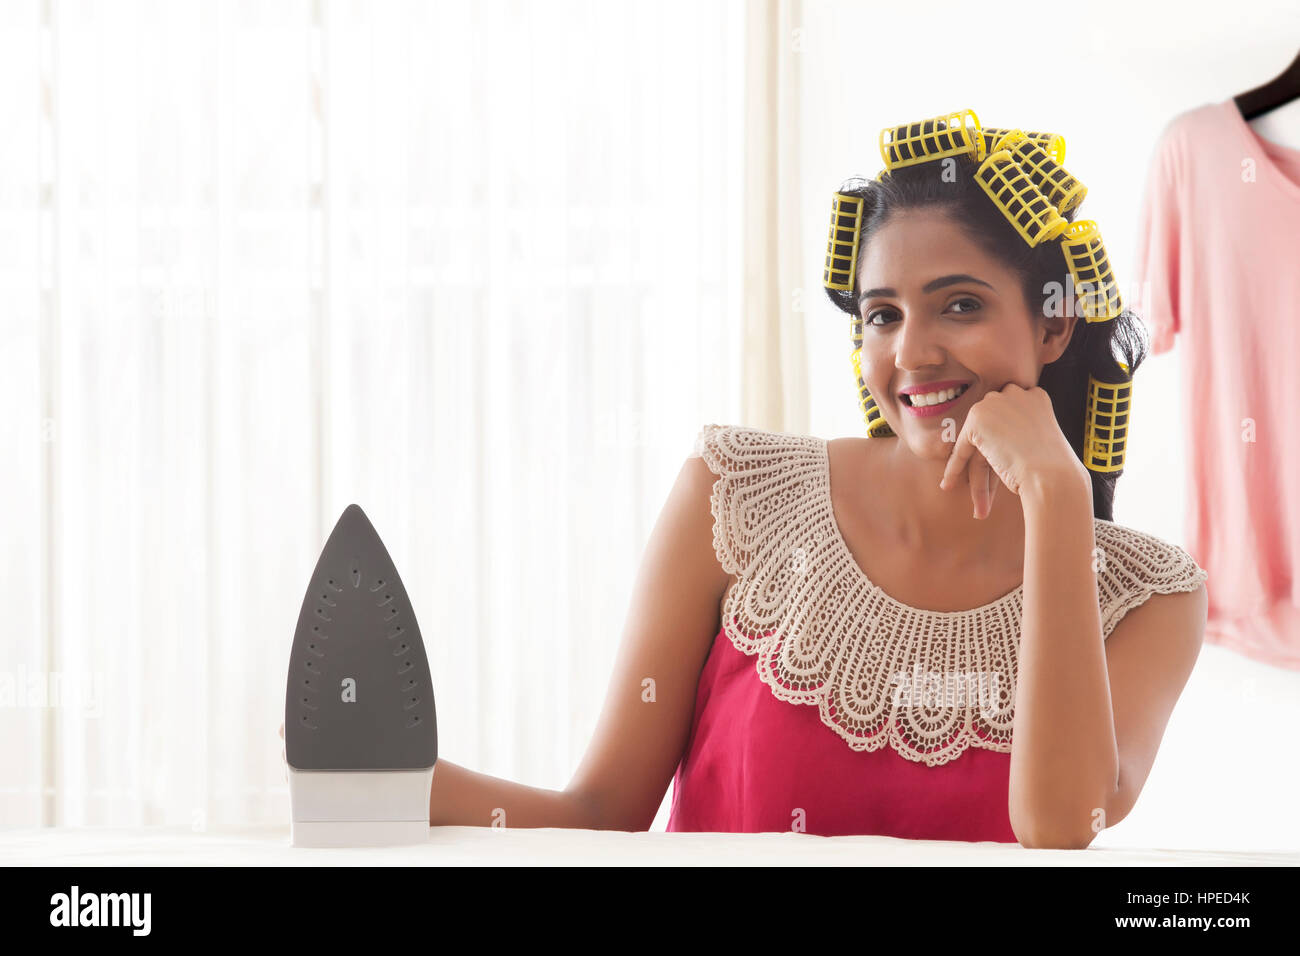 Young woman with hair curlers holding iron appliance Stock Photo